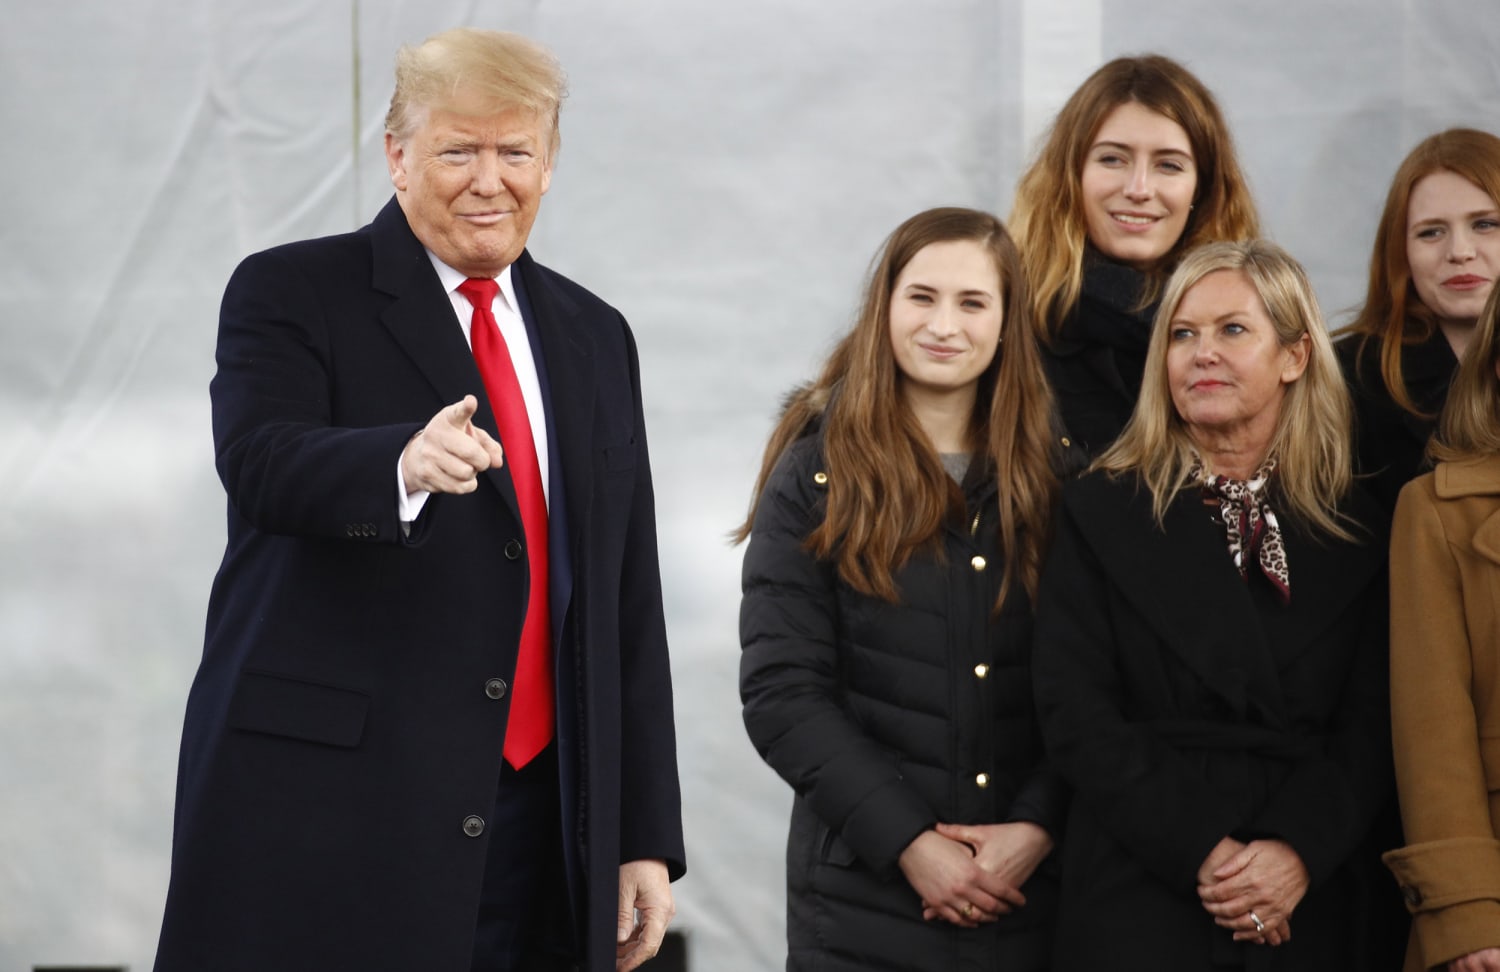 Trump Becomes First Sitting President To Attend March For Life Rally